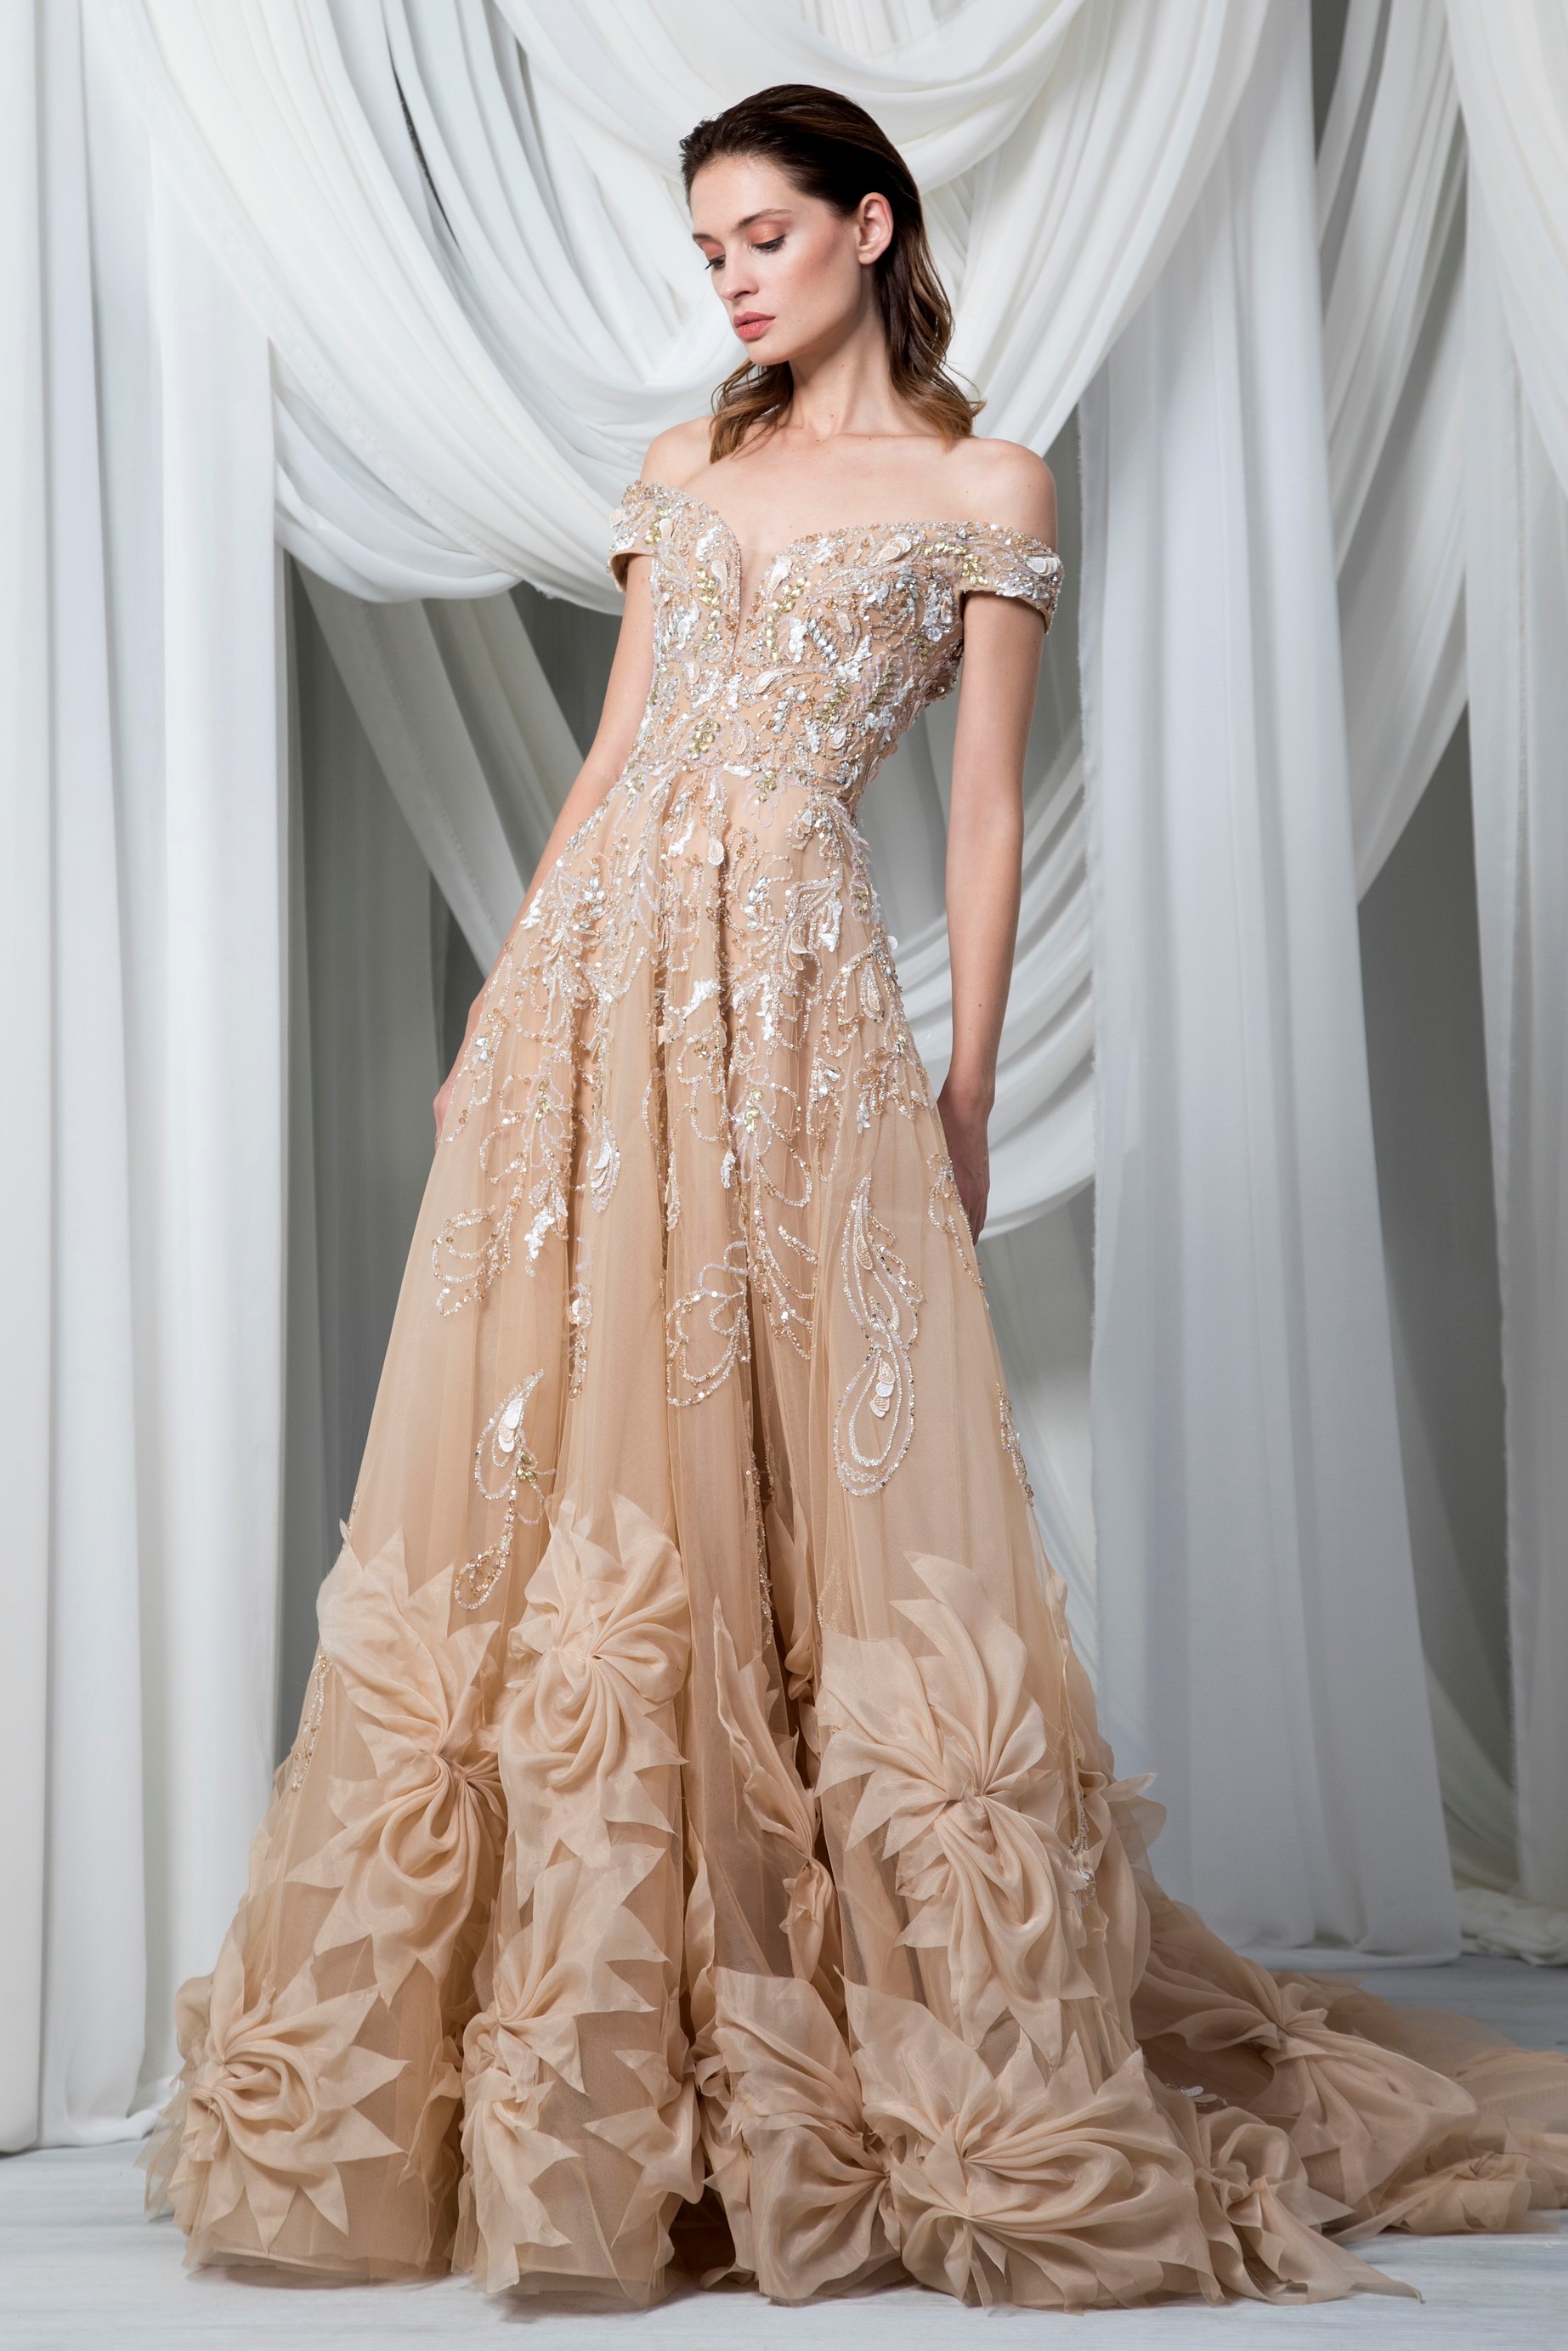 Golden girl bubu gown (also in black – HOUSE OF NAYA